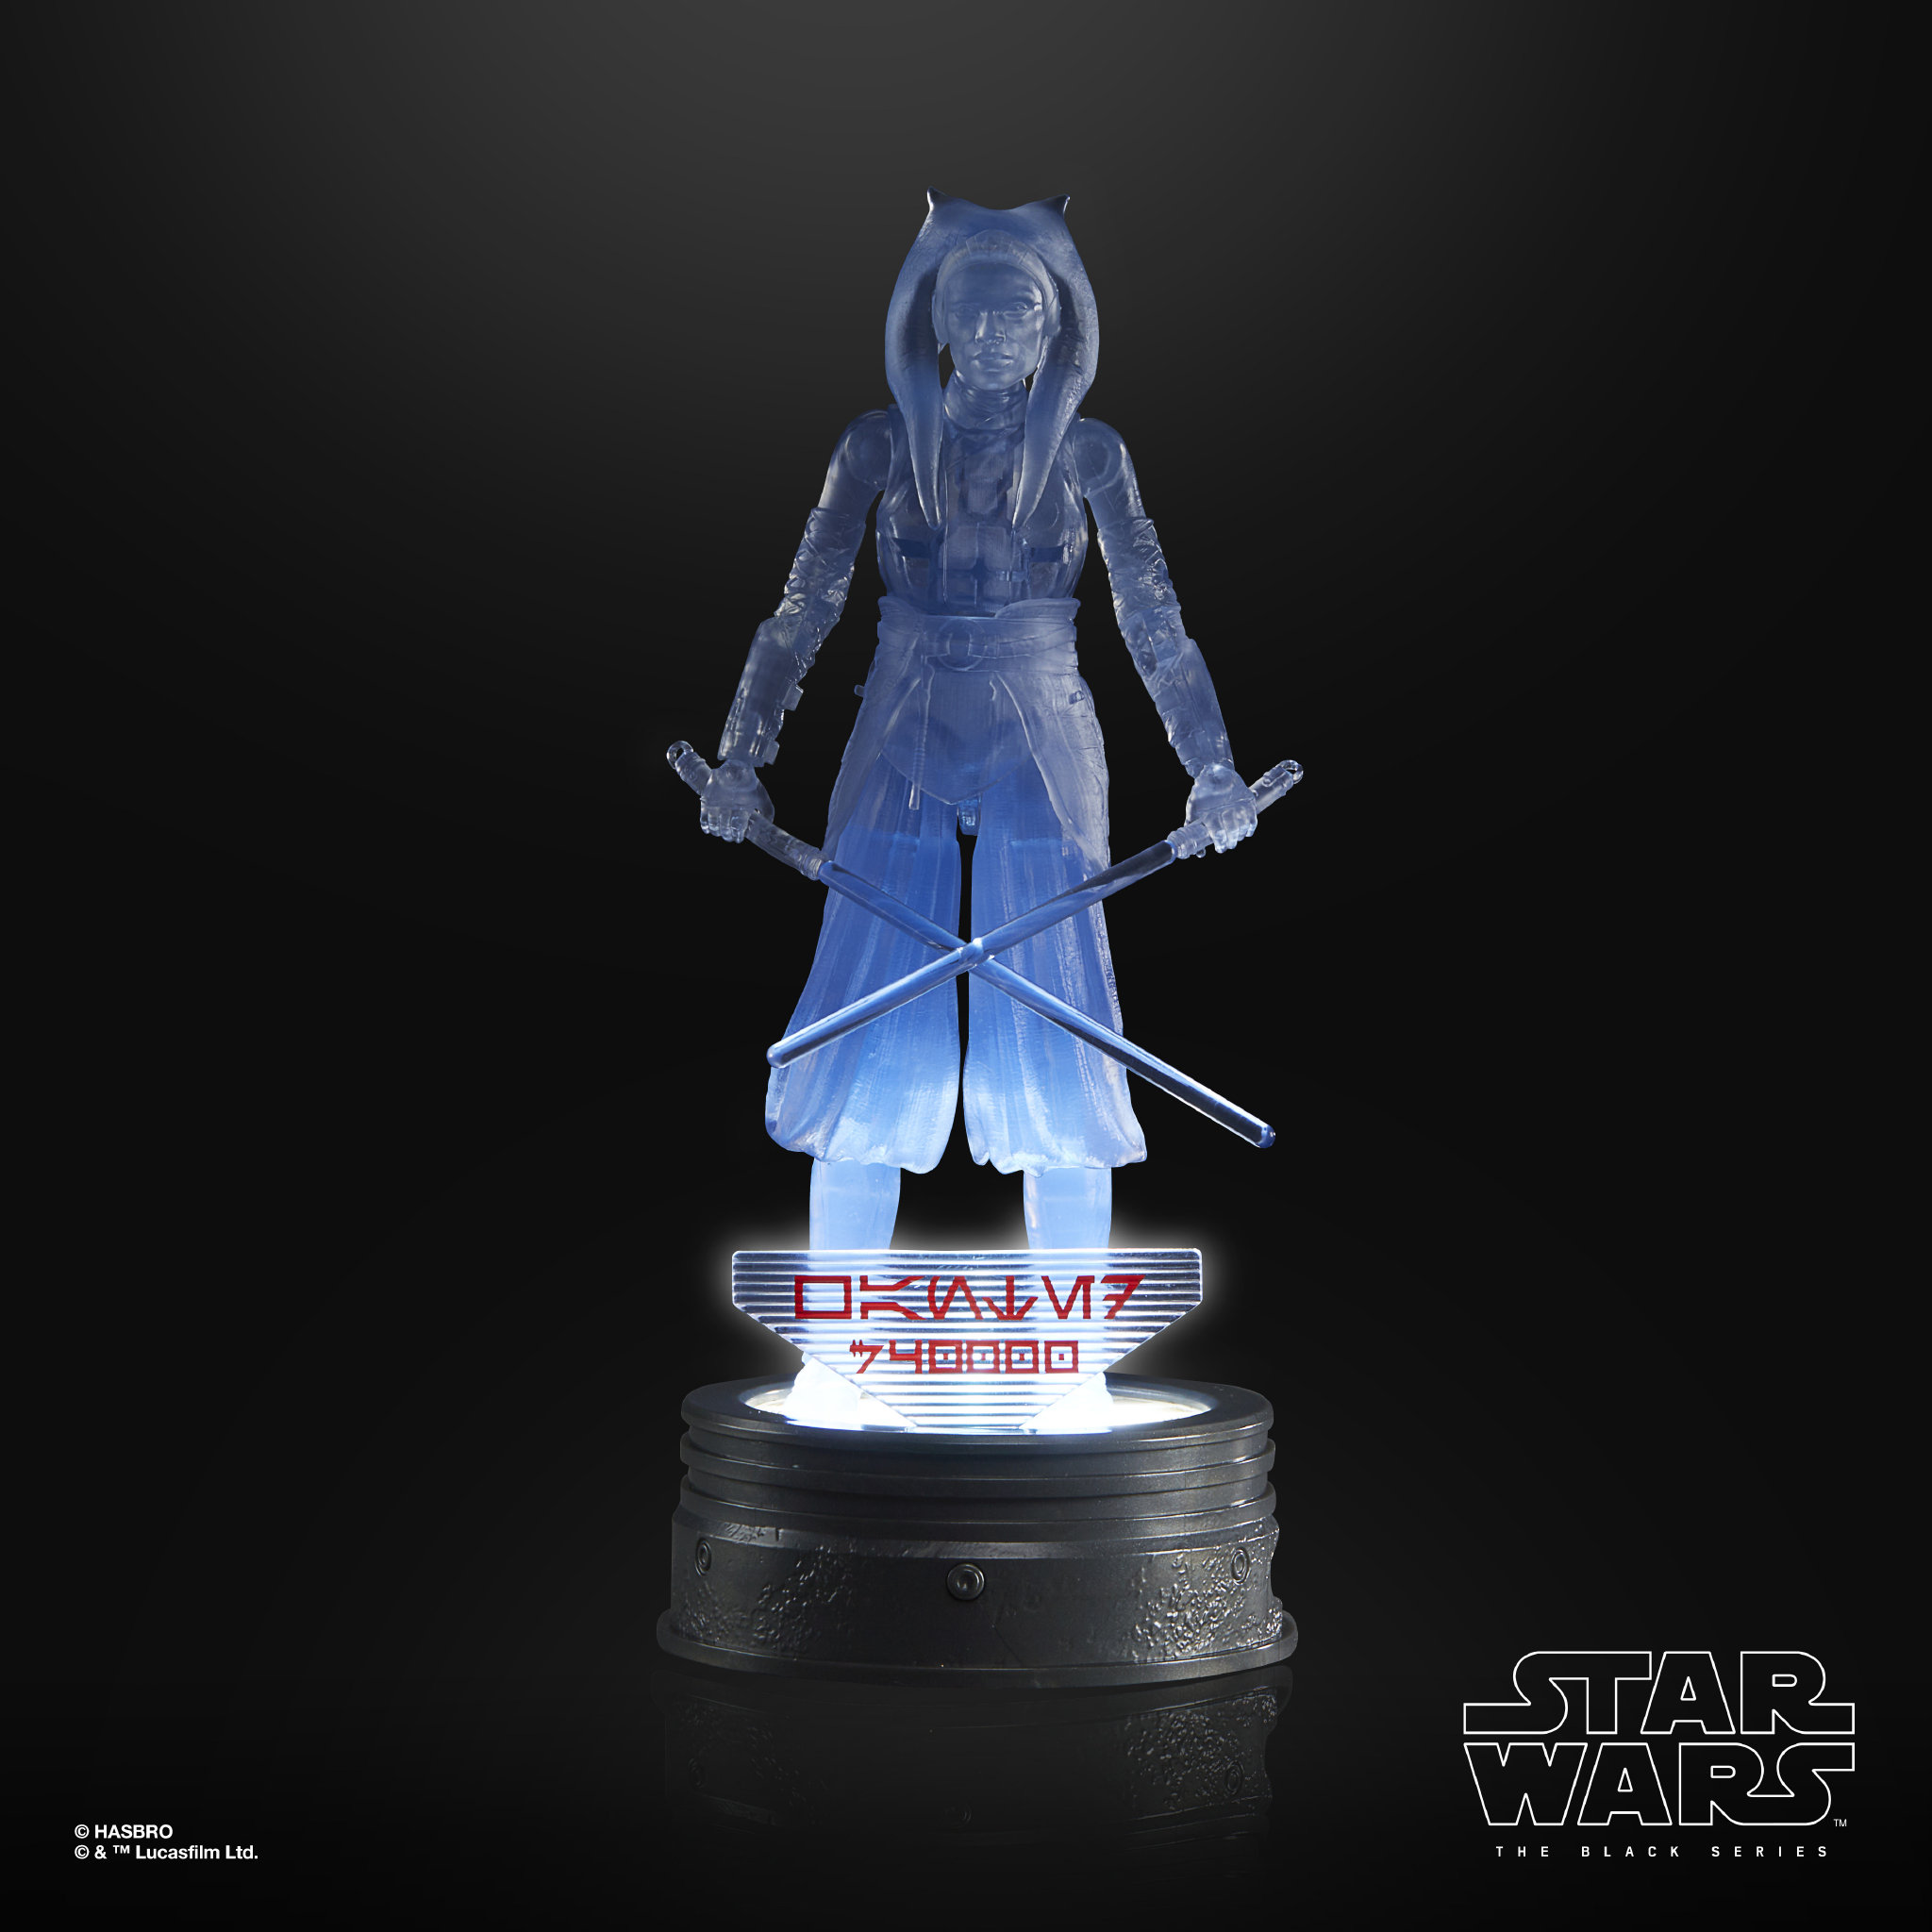 Hasbro Star Wars The hologram collection